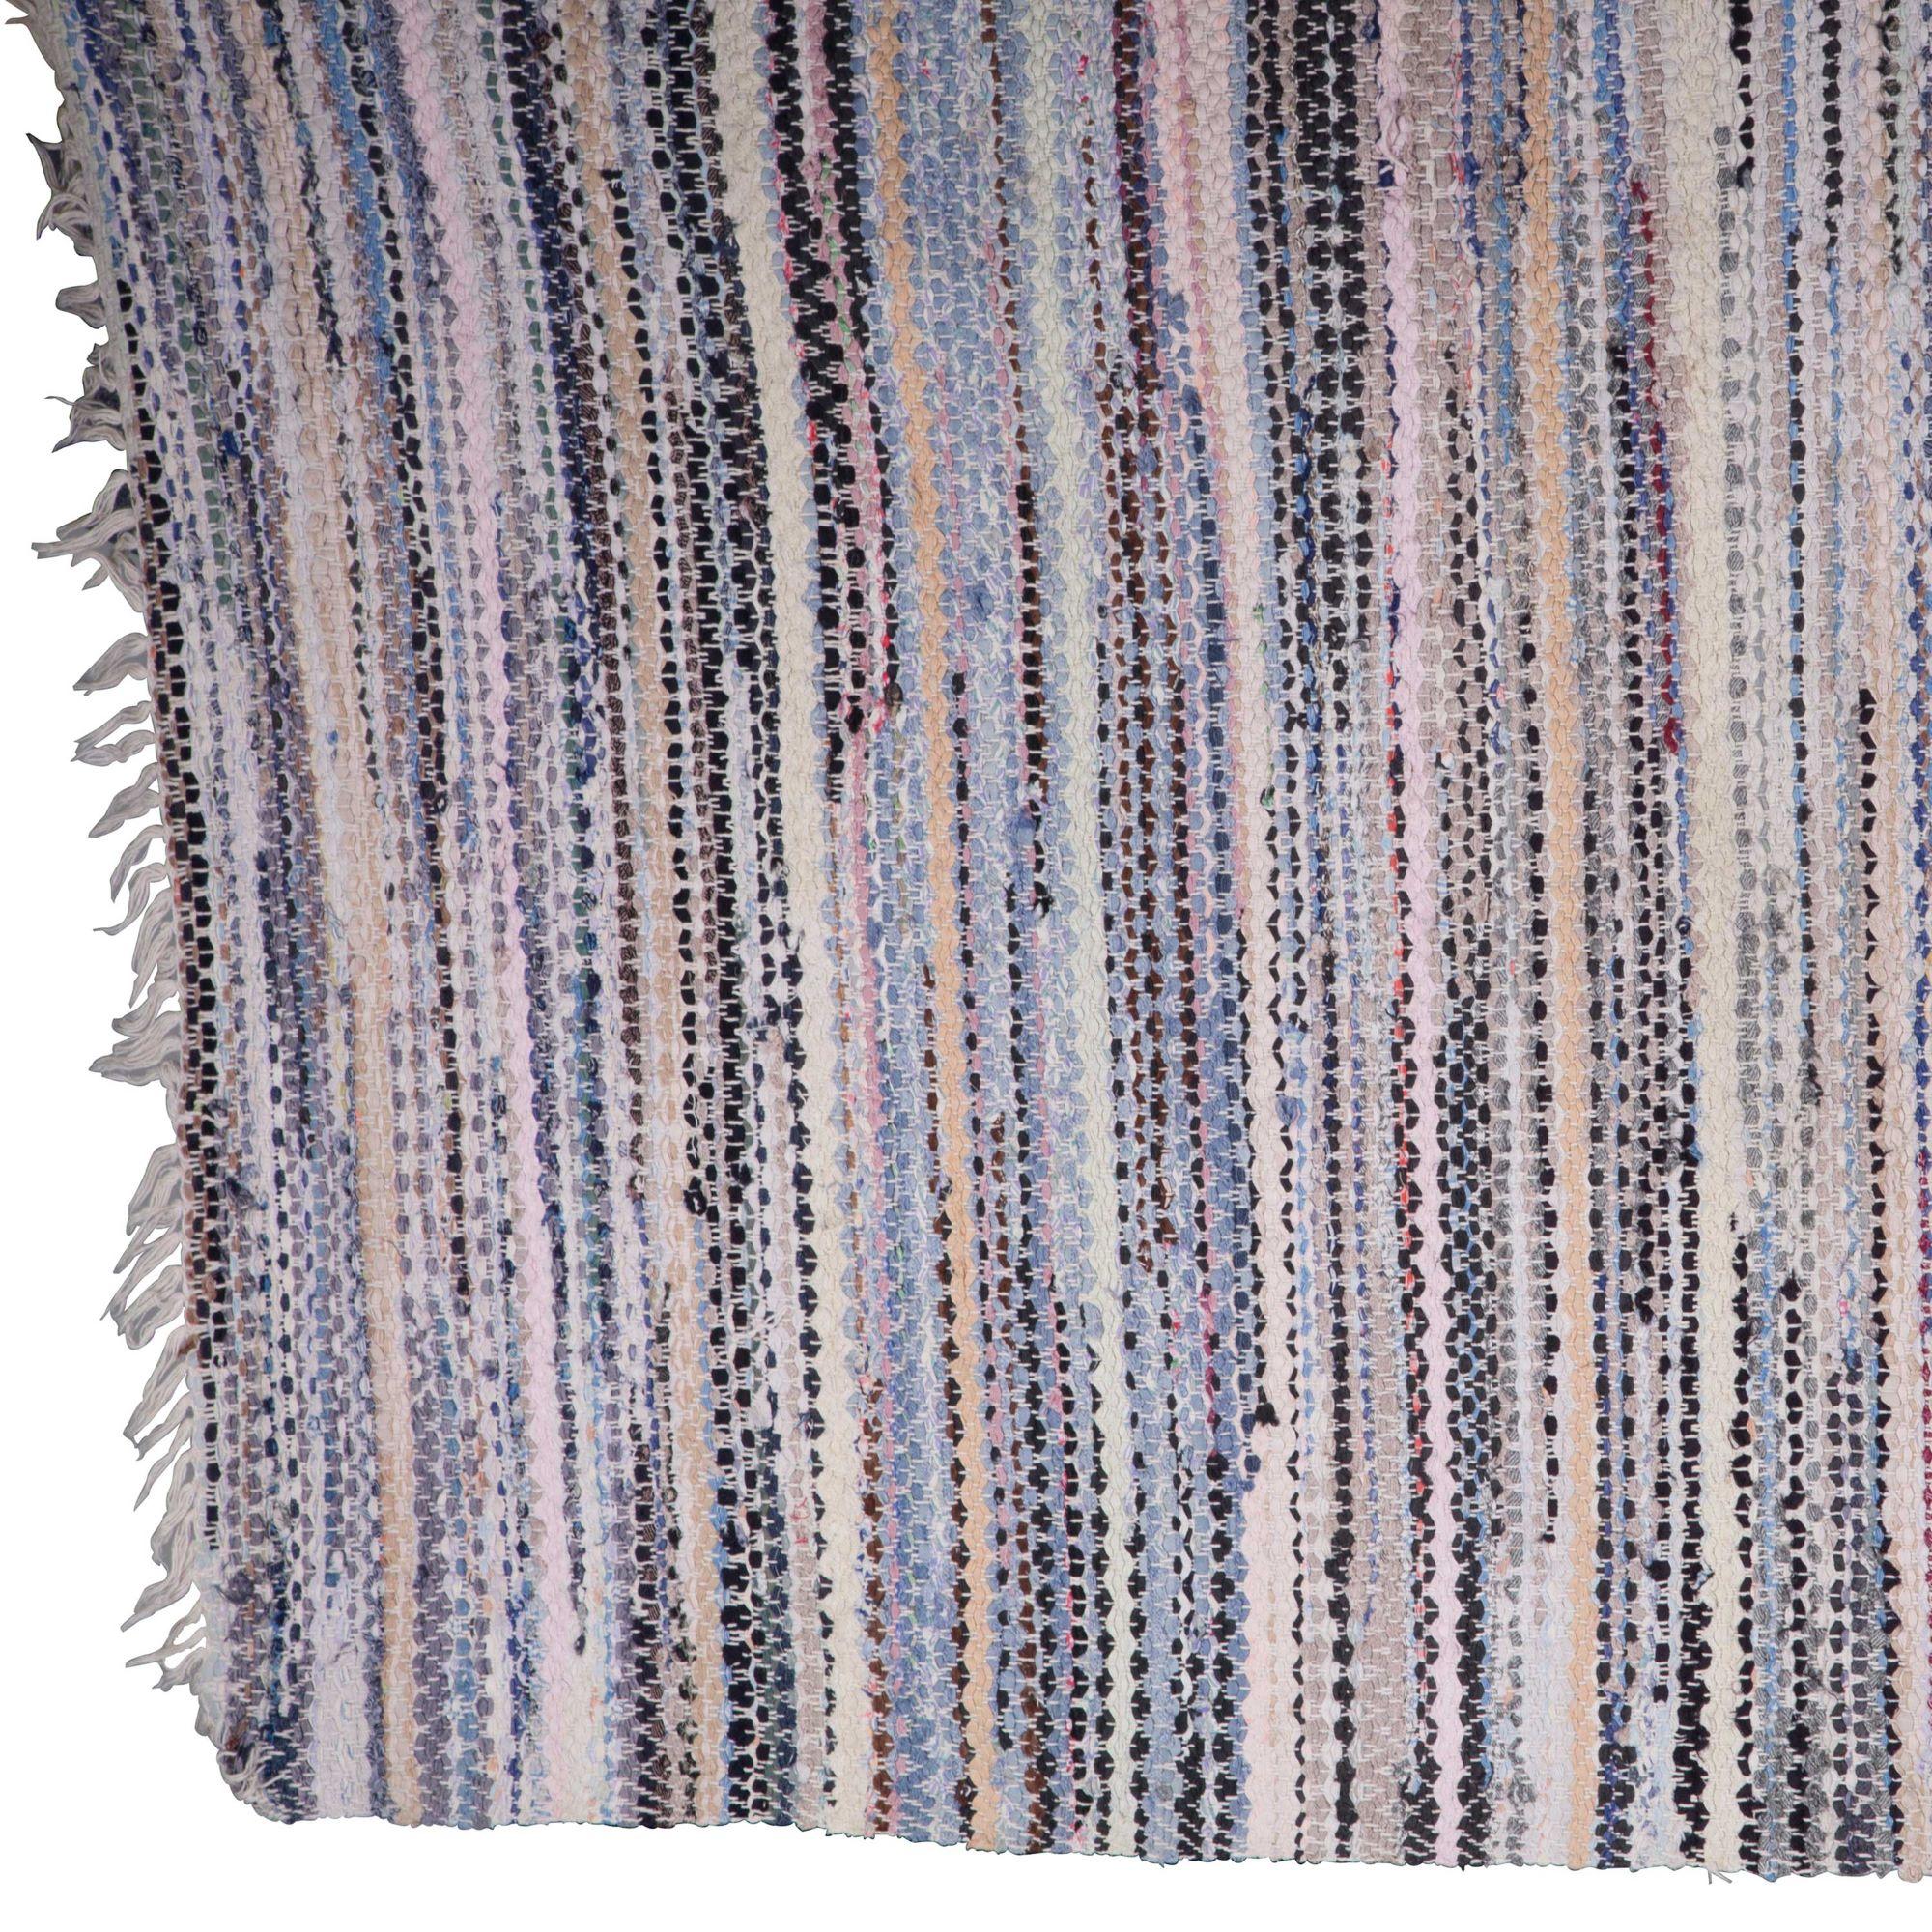 Swedish Handwoven Rug In Good Condition For Sale In Tetbury, Gloucestershire